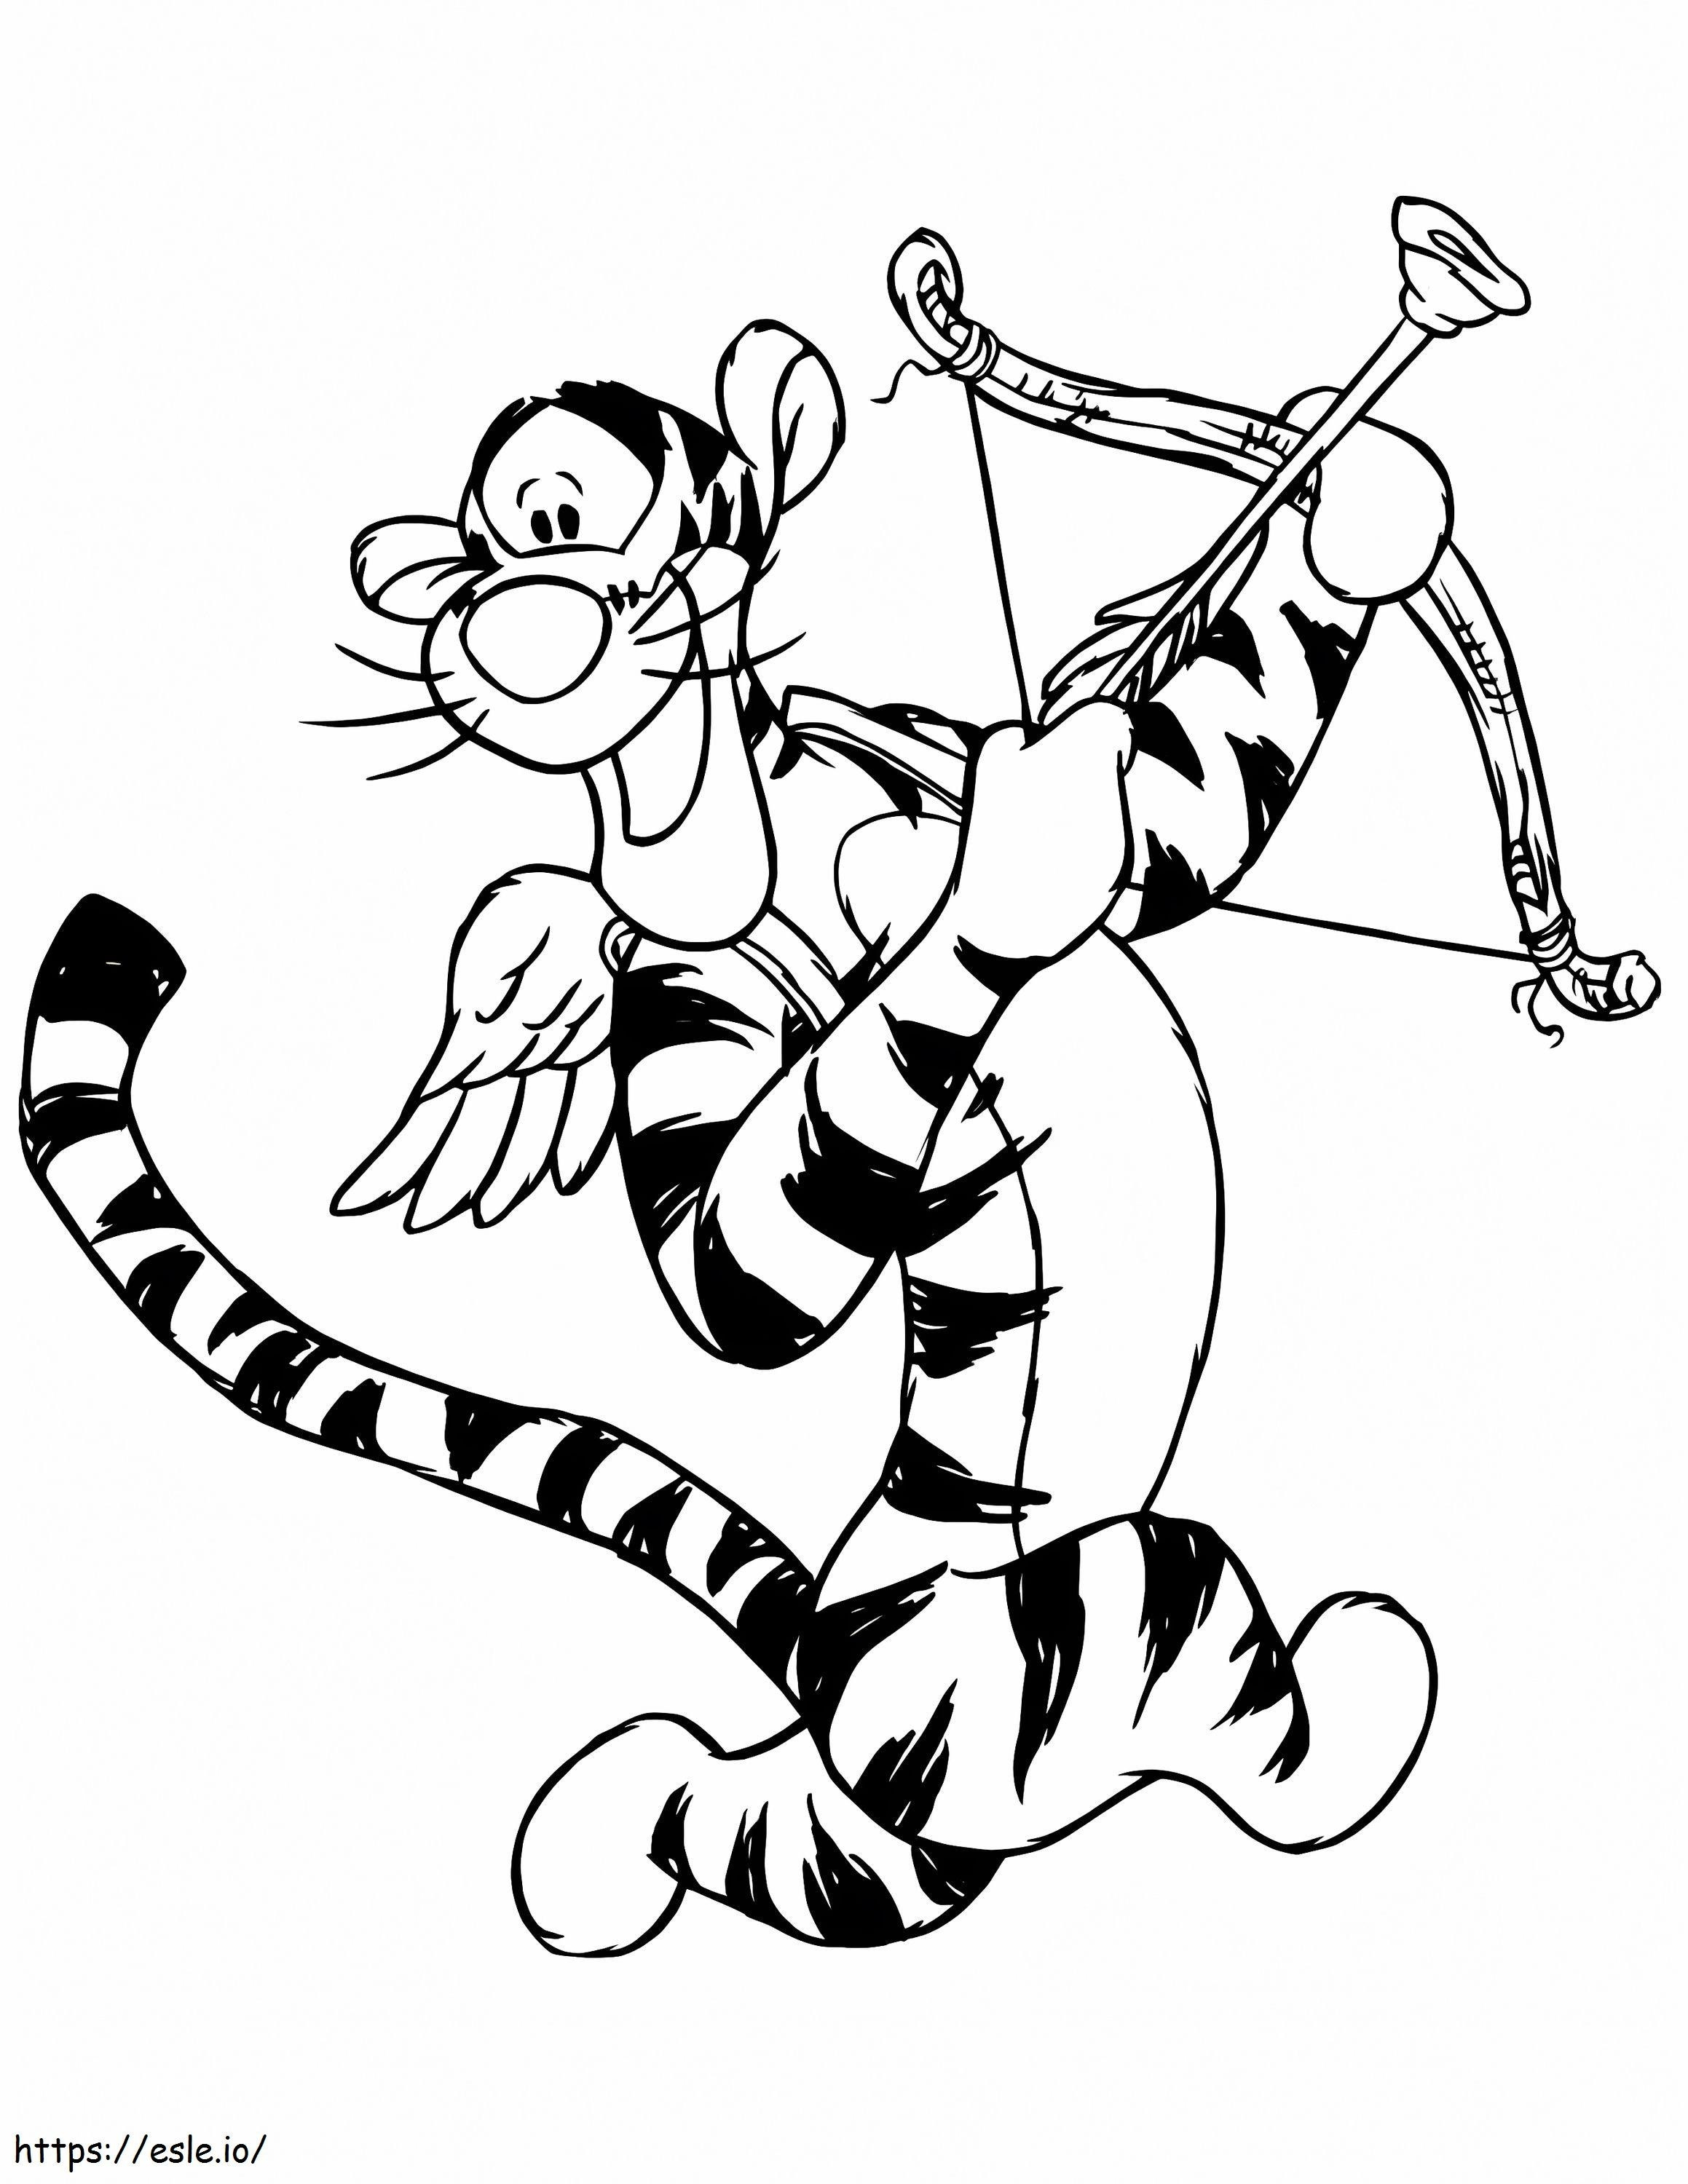 Gorgeous Tigger As Cupid coloring page